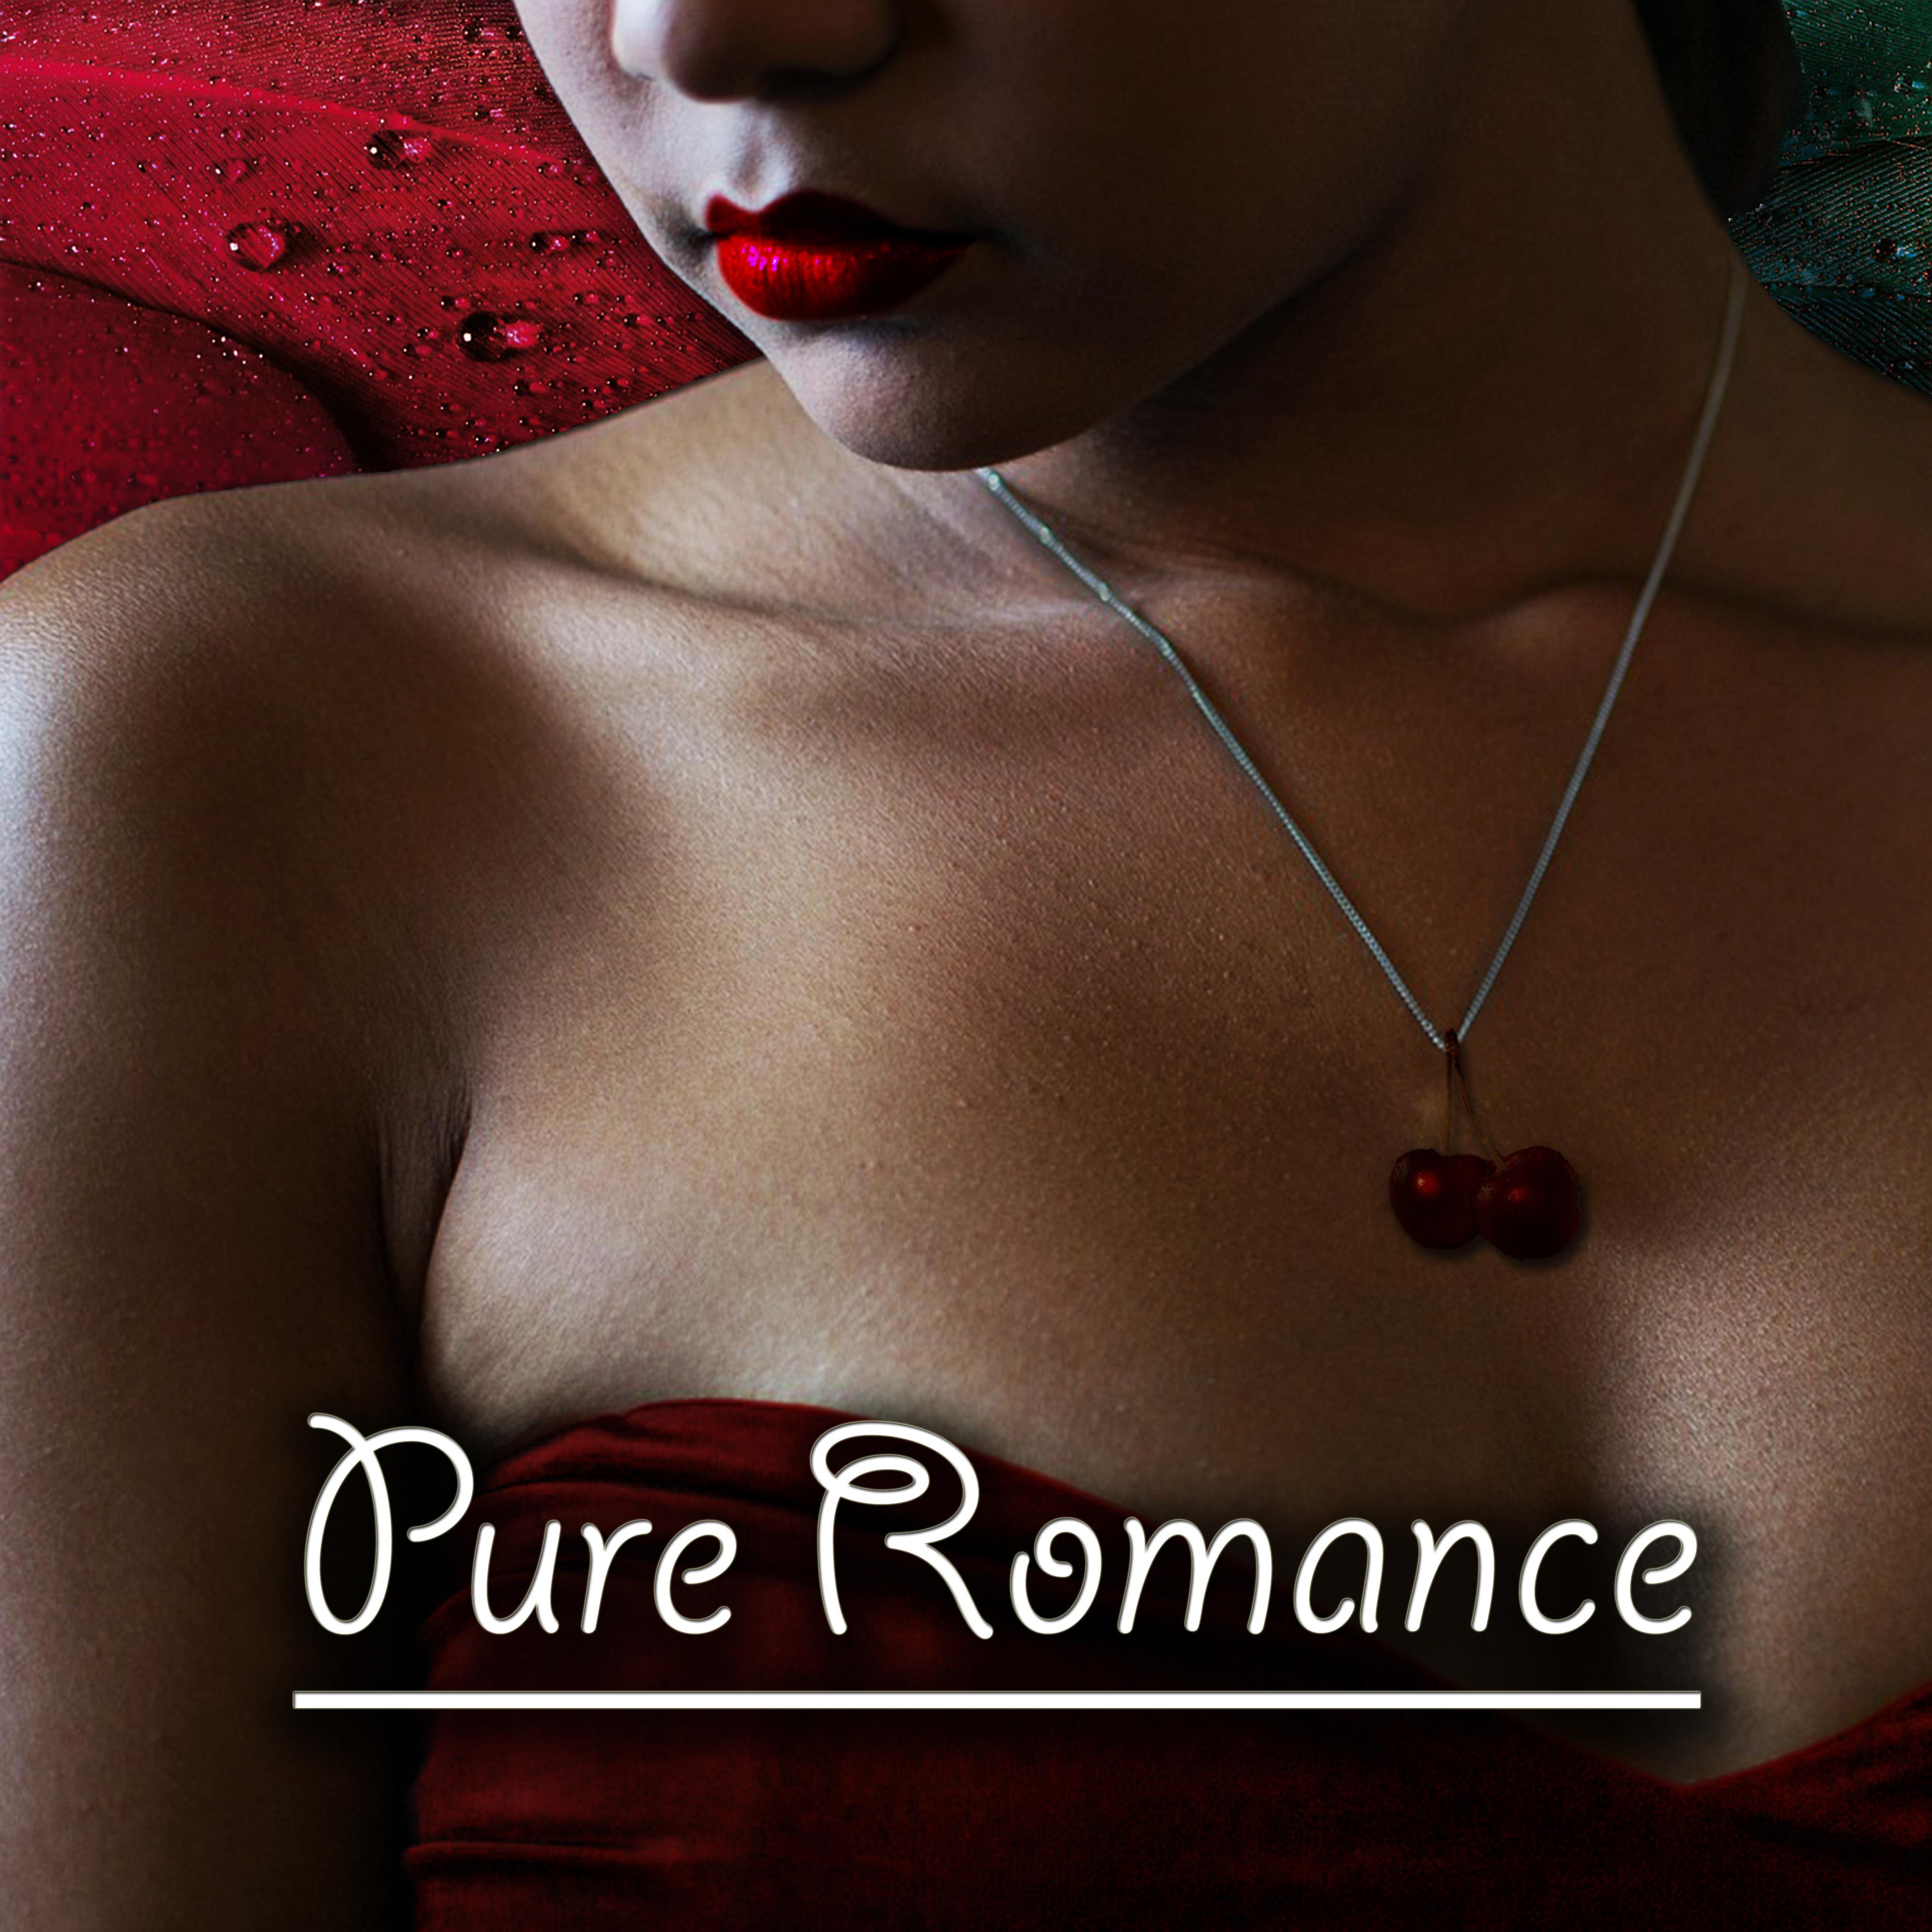 Pure Romance - Calm Love Piano, Romantic Piano Music, Valentines Music, Passion & *********, Music for Lovers, Sensuality and Erotic Massage, Smooth Jazz & Piano Bar